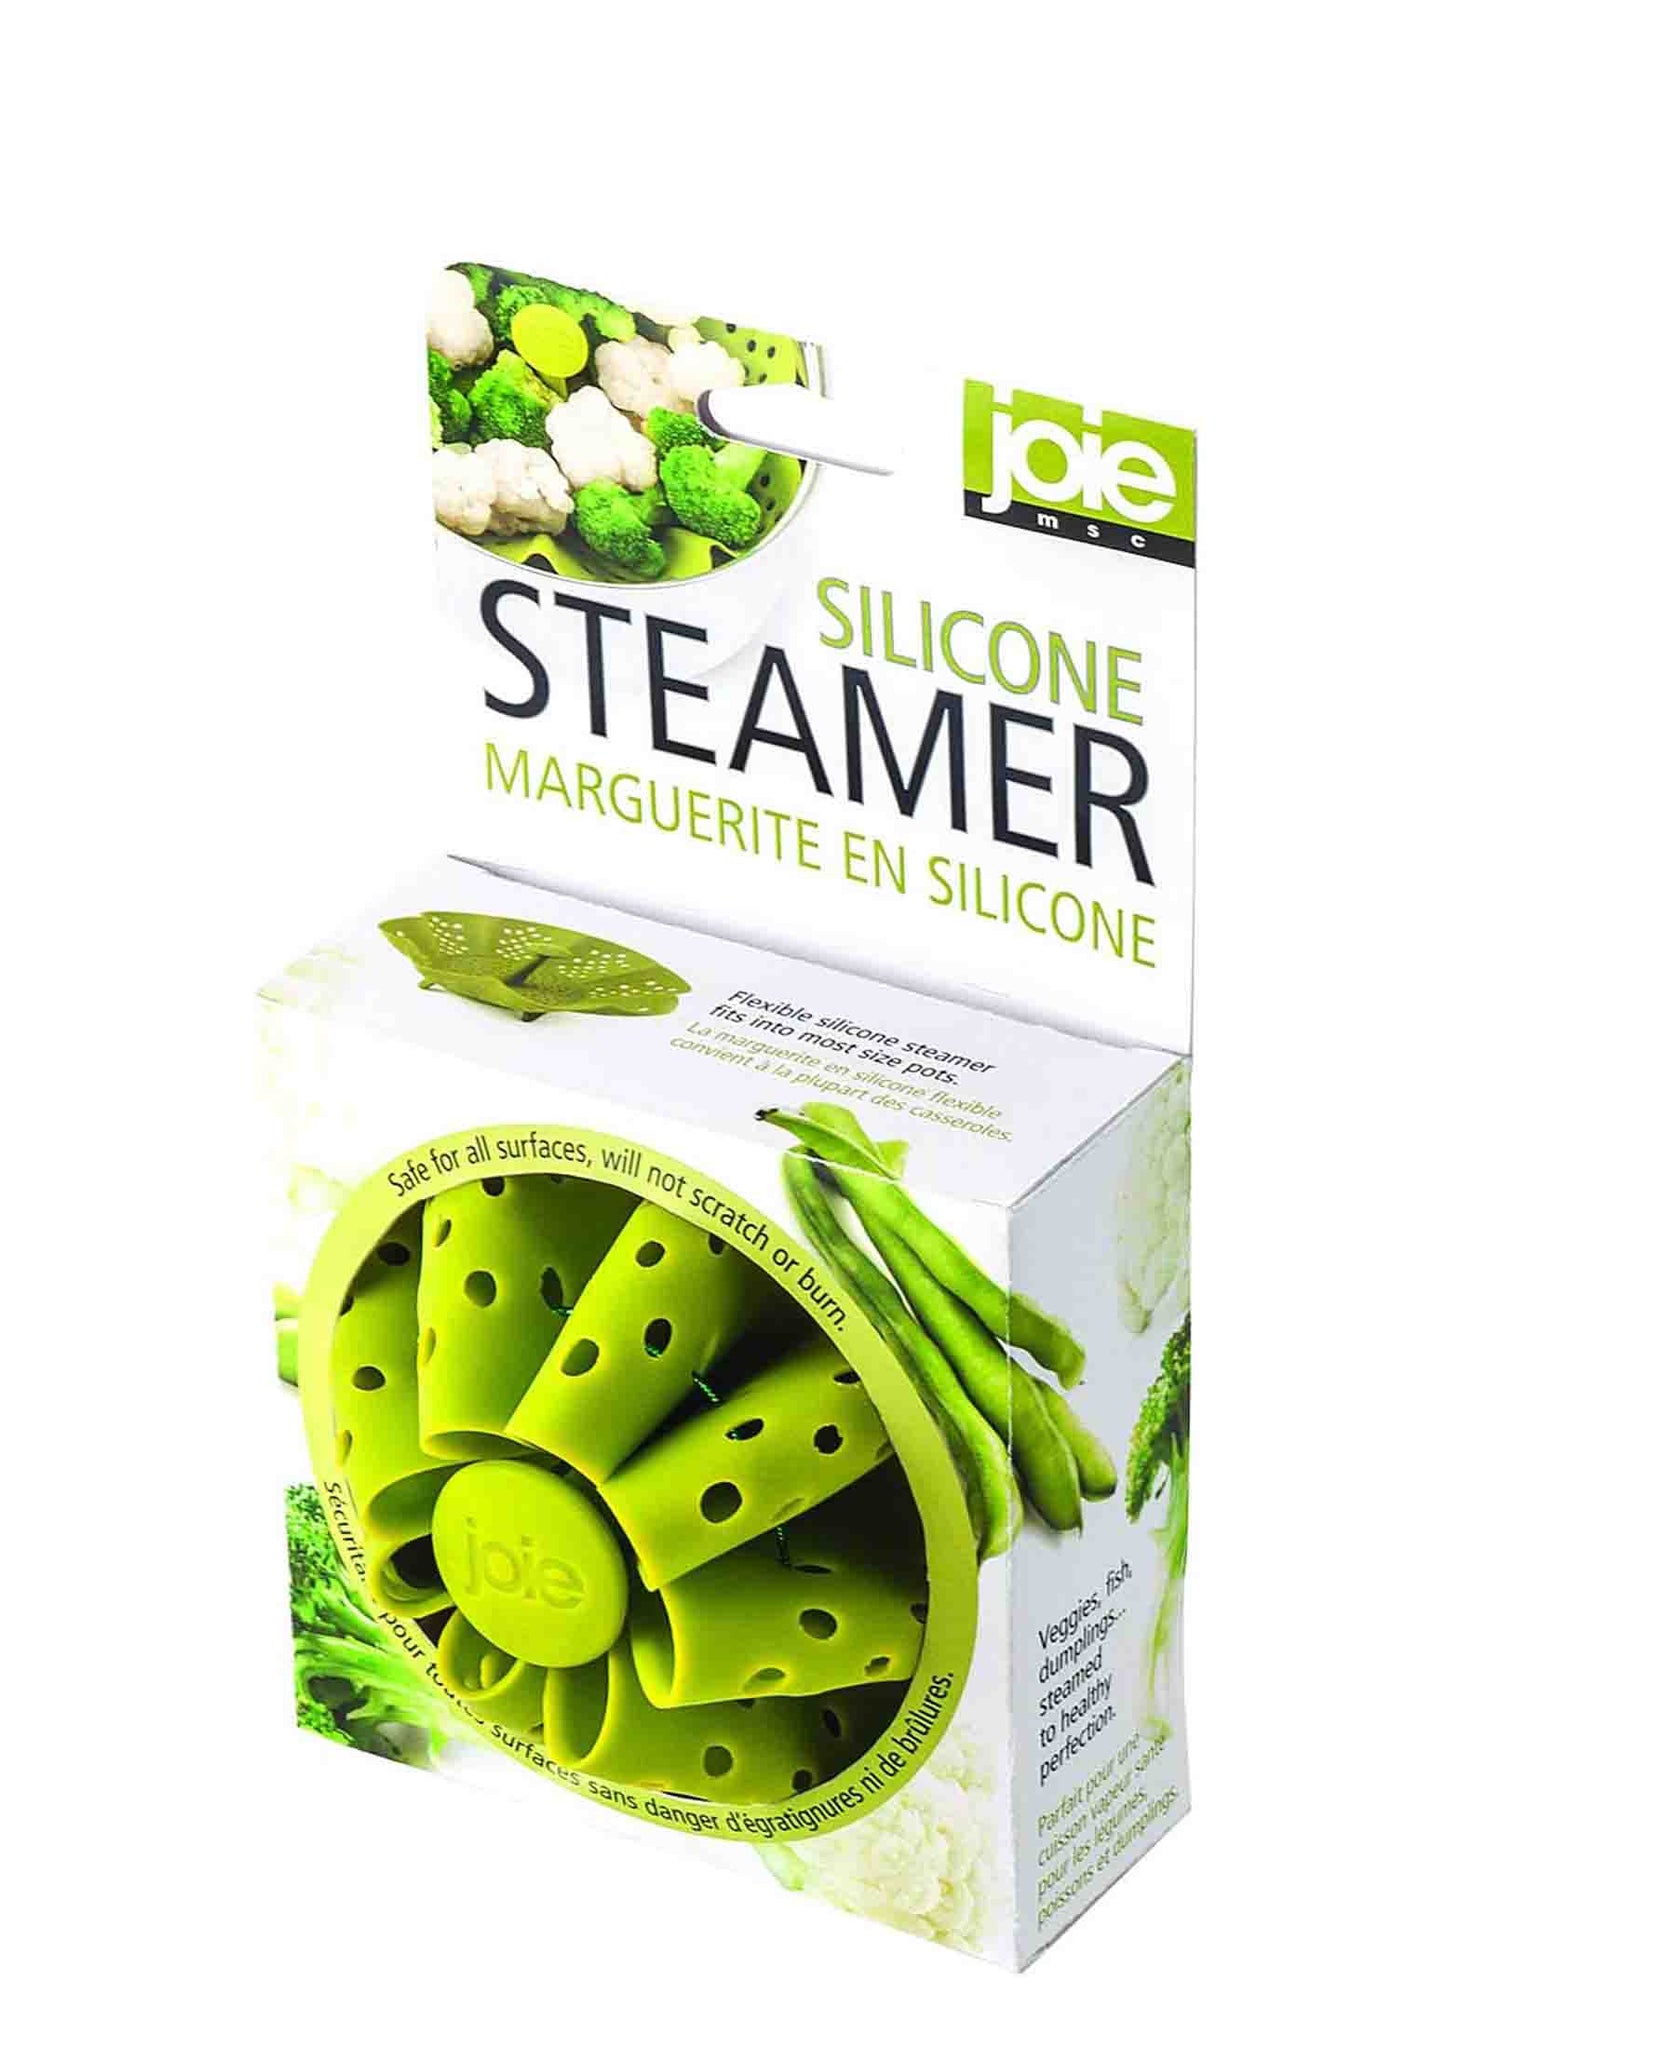 Joie Collapsible Silicone Steamer - Green